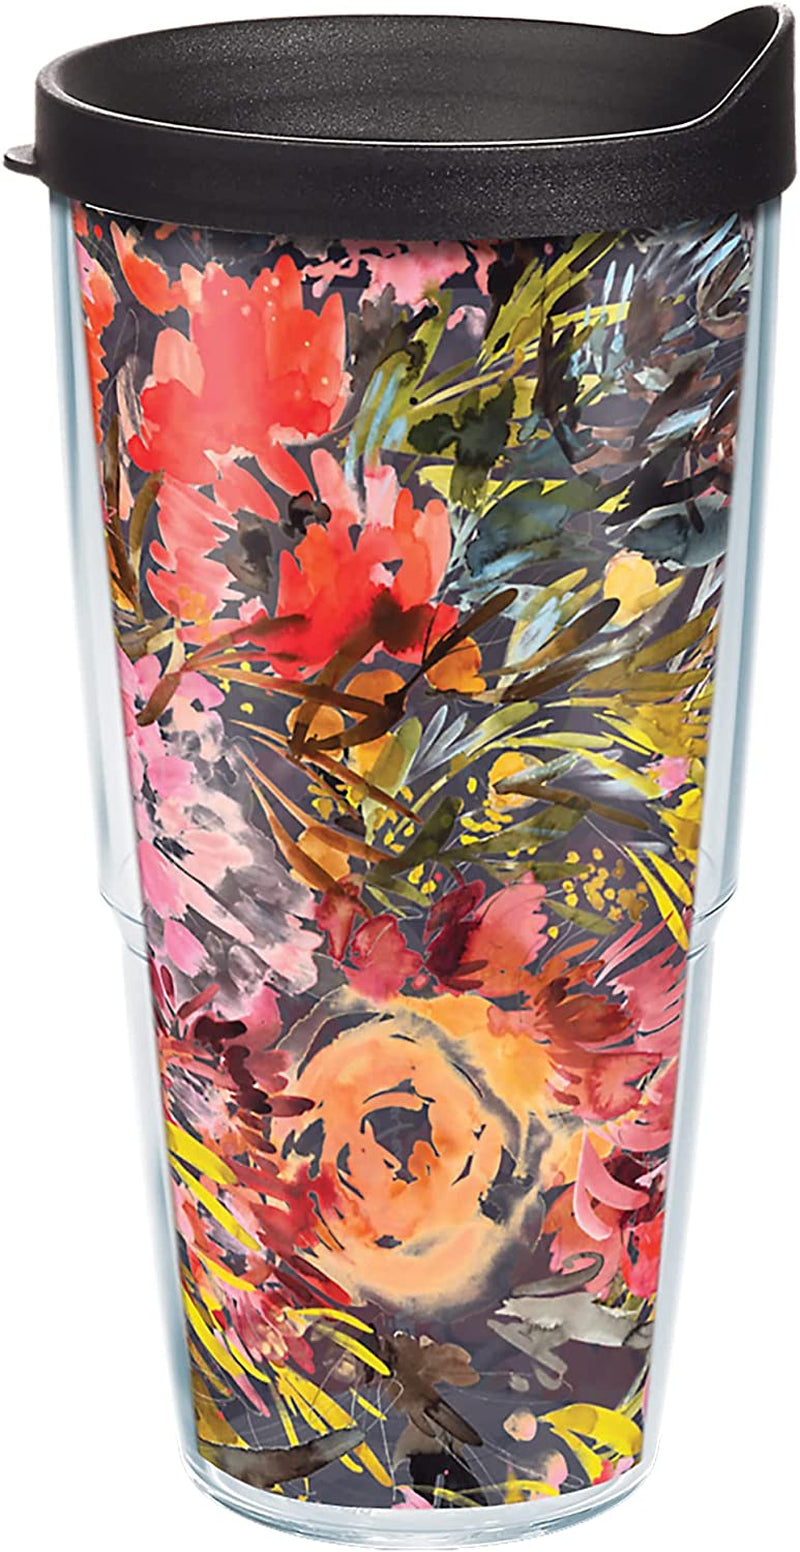 Tervis Made in USA Double Walled Kelly Ventura Floral Collection Insulated Tumbler Cup Keeps Drinks Cold & Hot, 16Oz 4Pk - Classic, Assorted Home & Garden > Kitchen & Dining > Tableware > Drinkware Tervis Bright Floral 24oz - Classic 